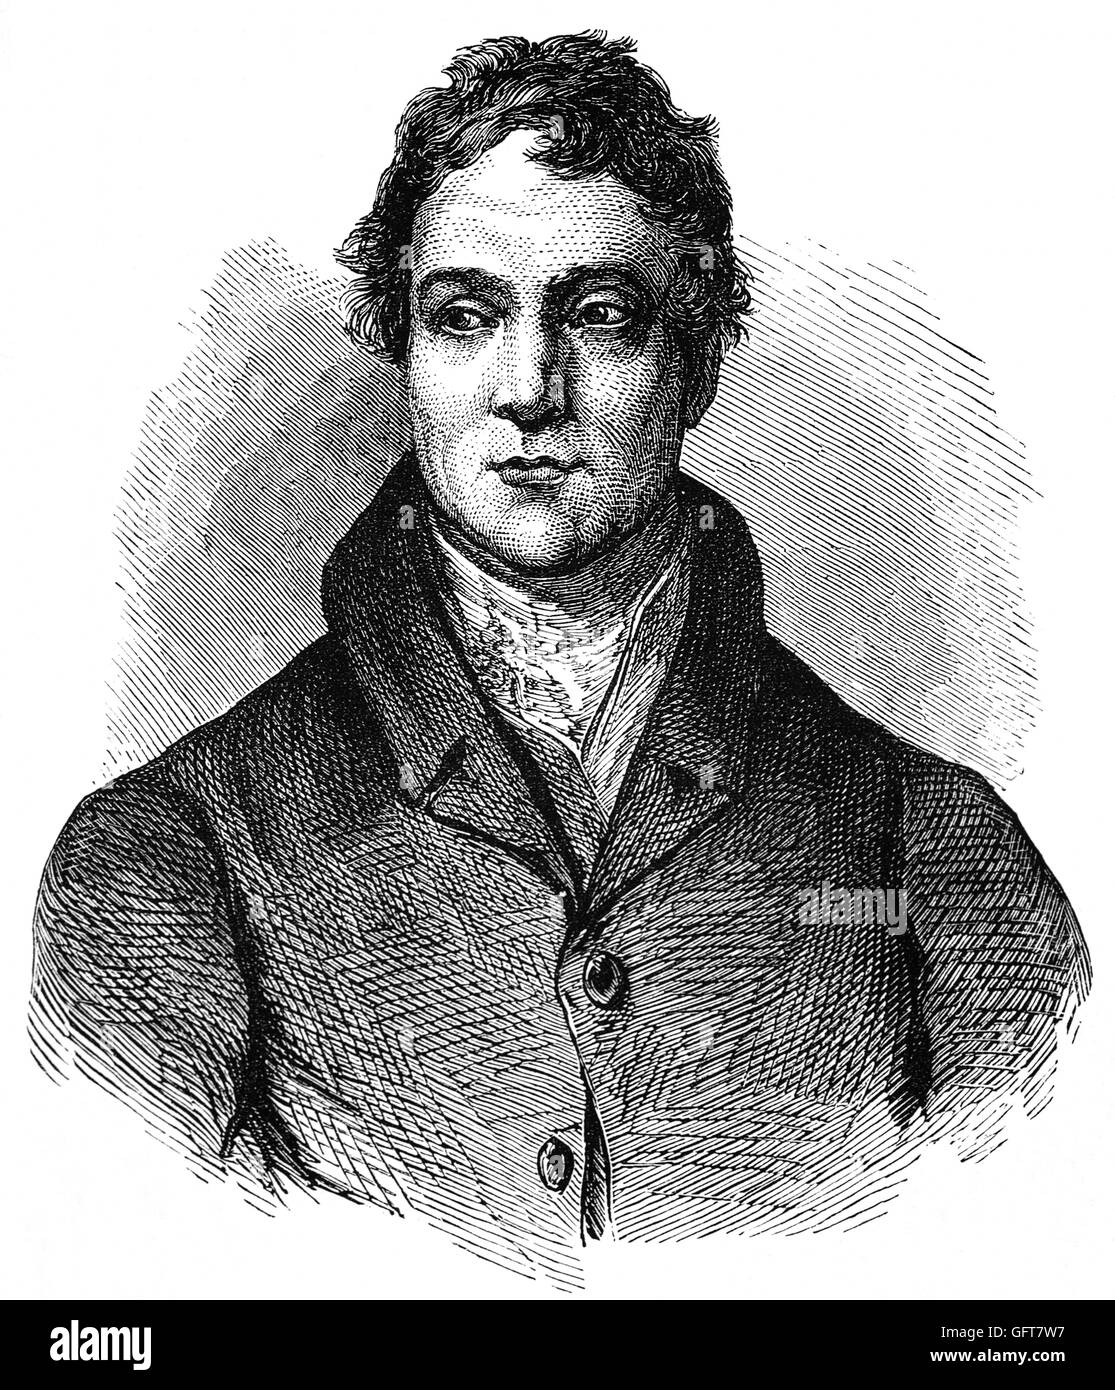 William Huskisson (1770 – 1830) was a British statesman, financier, and Member of Parliament for several constituencies, including Liverpool. He is best known today, however, as the world's first widely reported railway casualty as he was run over and fatally wounded by George Stephenson's pioneering locomotive engine Rocket. Stock Photo